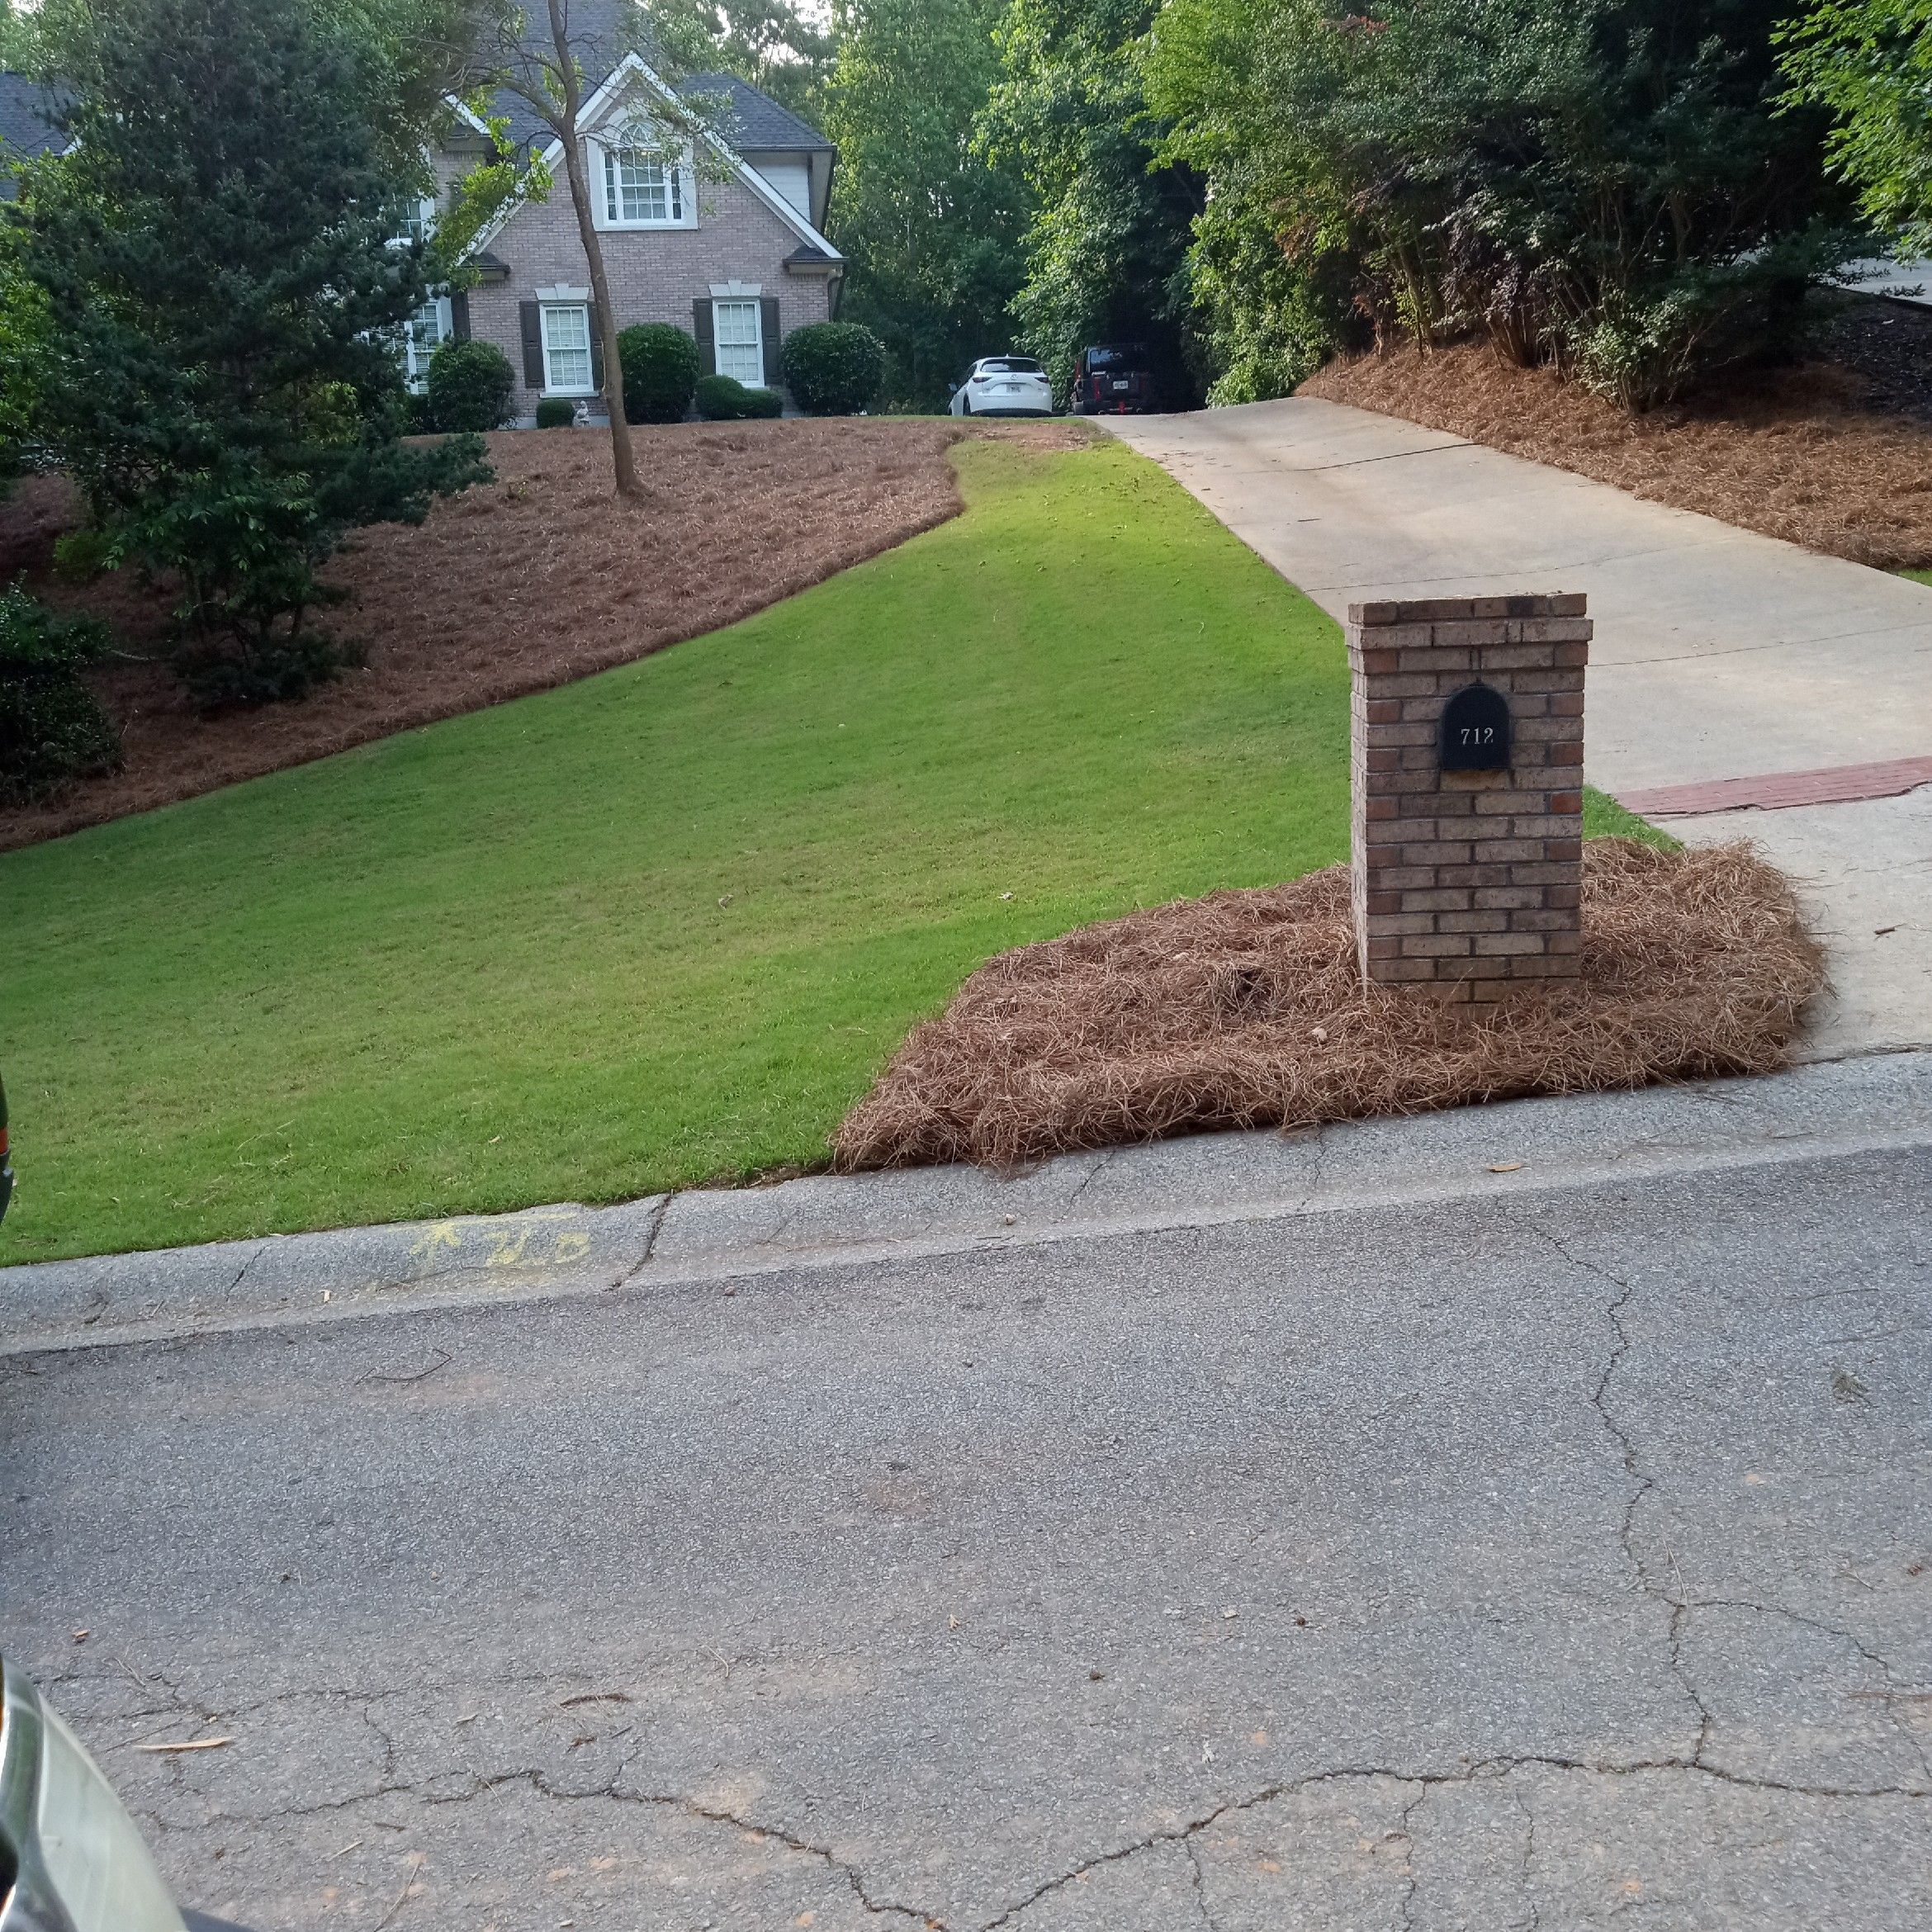 Better Works Landscaping Services, E Greenville St, Anderson, 29621